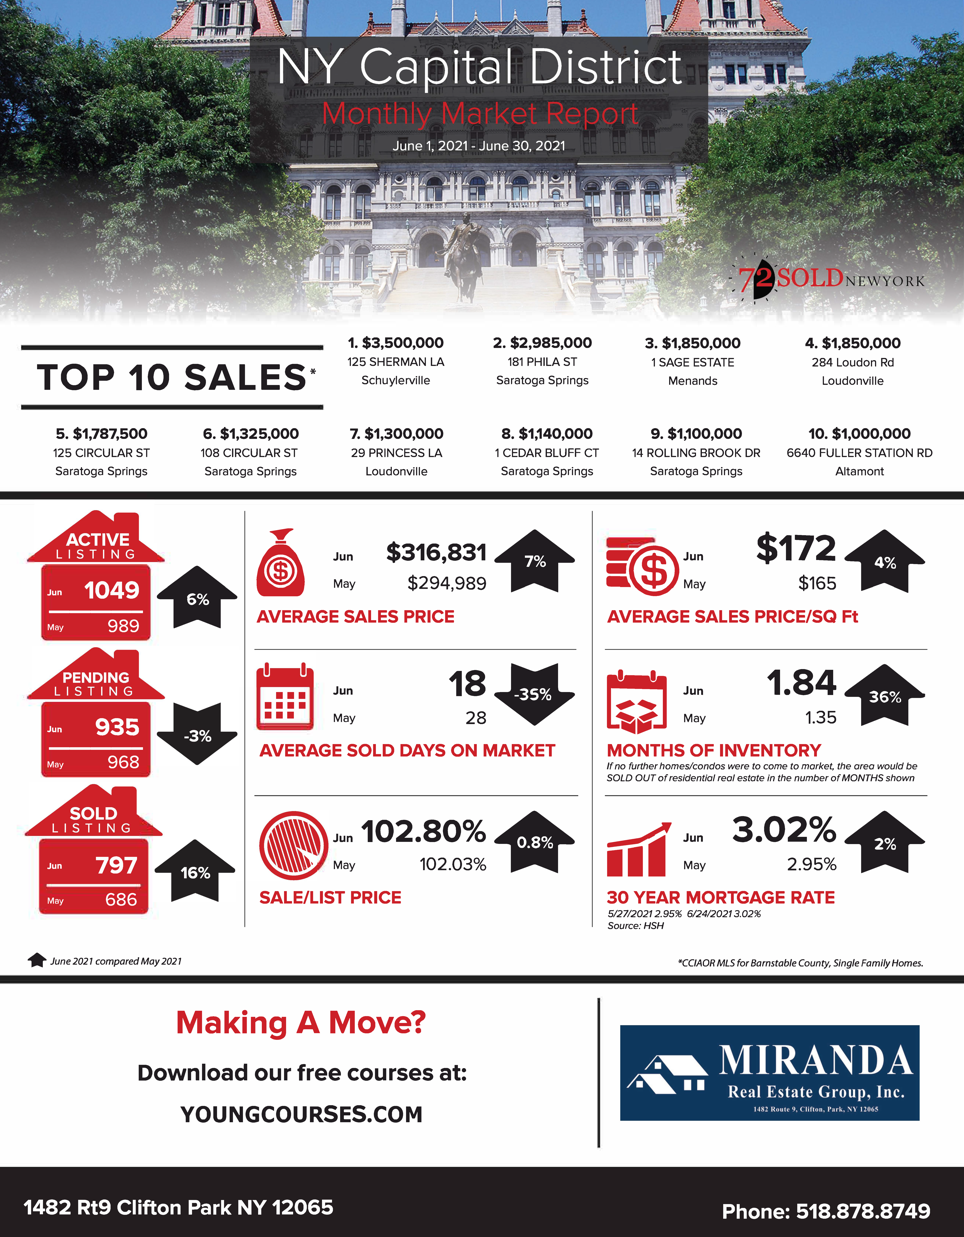 REAL ESTATE MARKET UPDATE | NY CAPITAL DISTRICT | JULY 2021